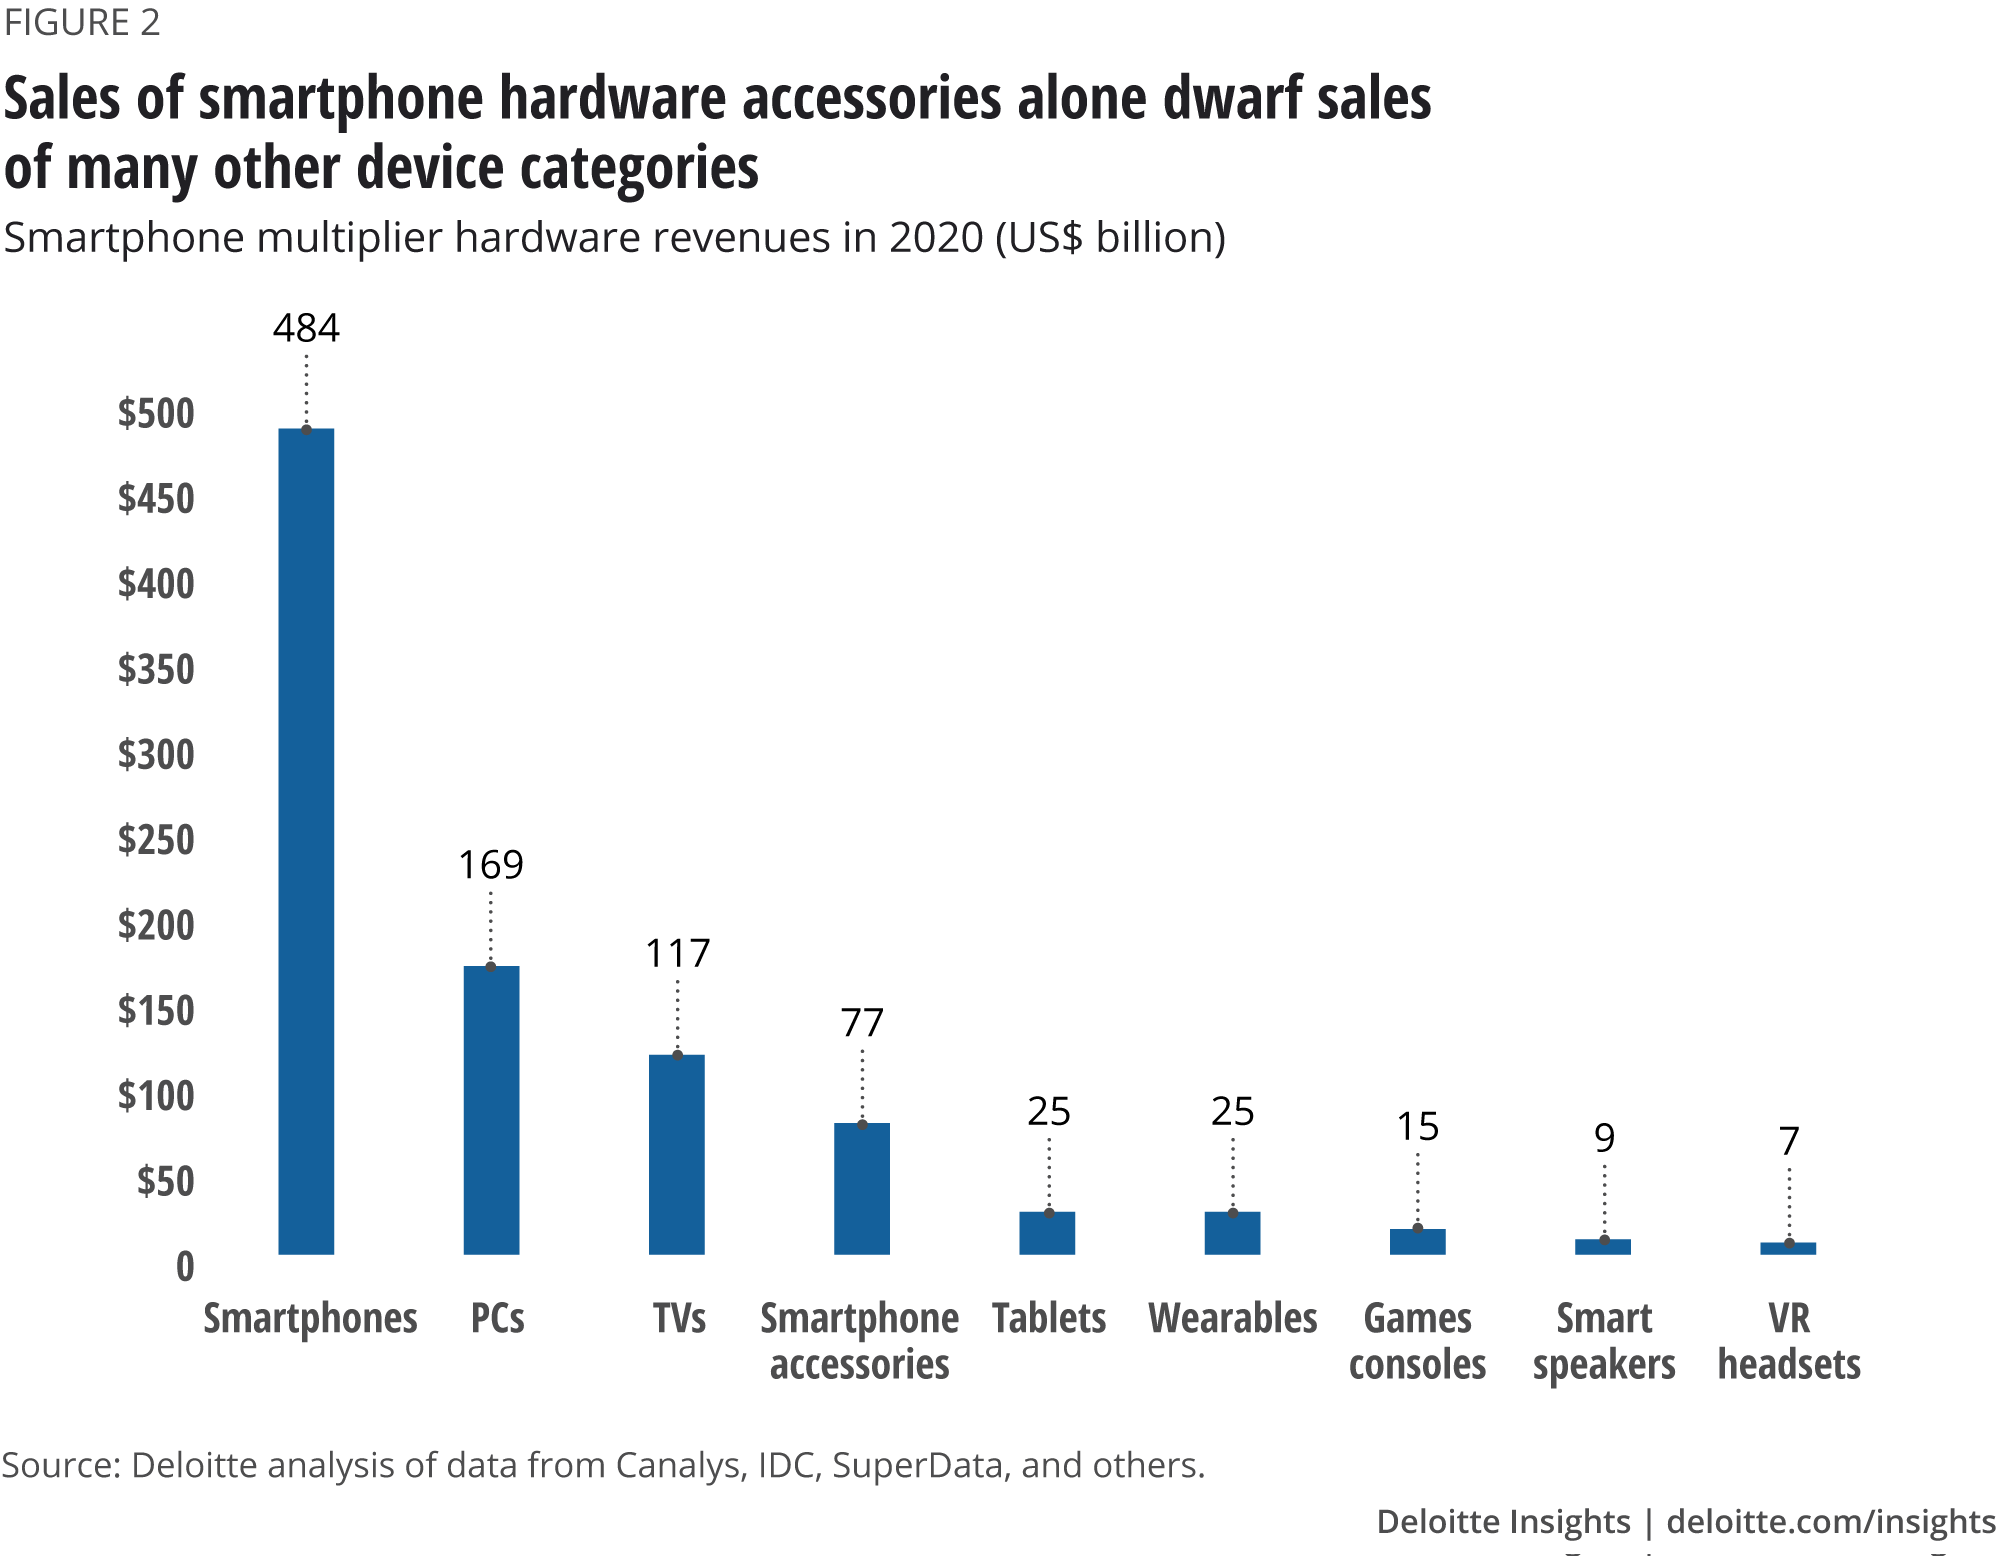 Sales of smartphone hardware accessories alone dwarf sales of many other device categories